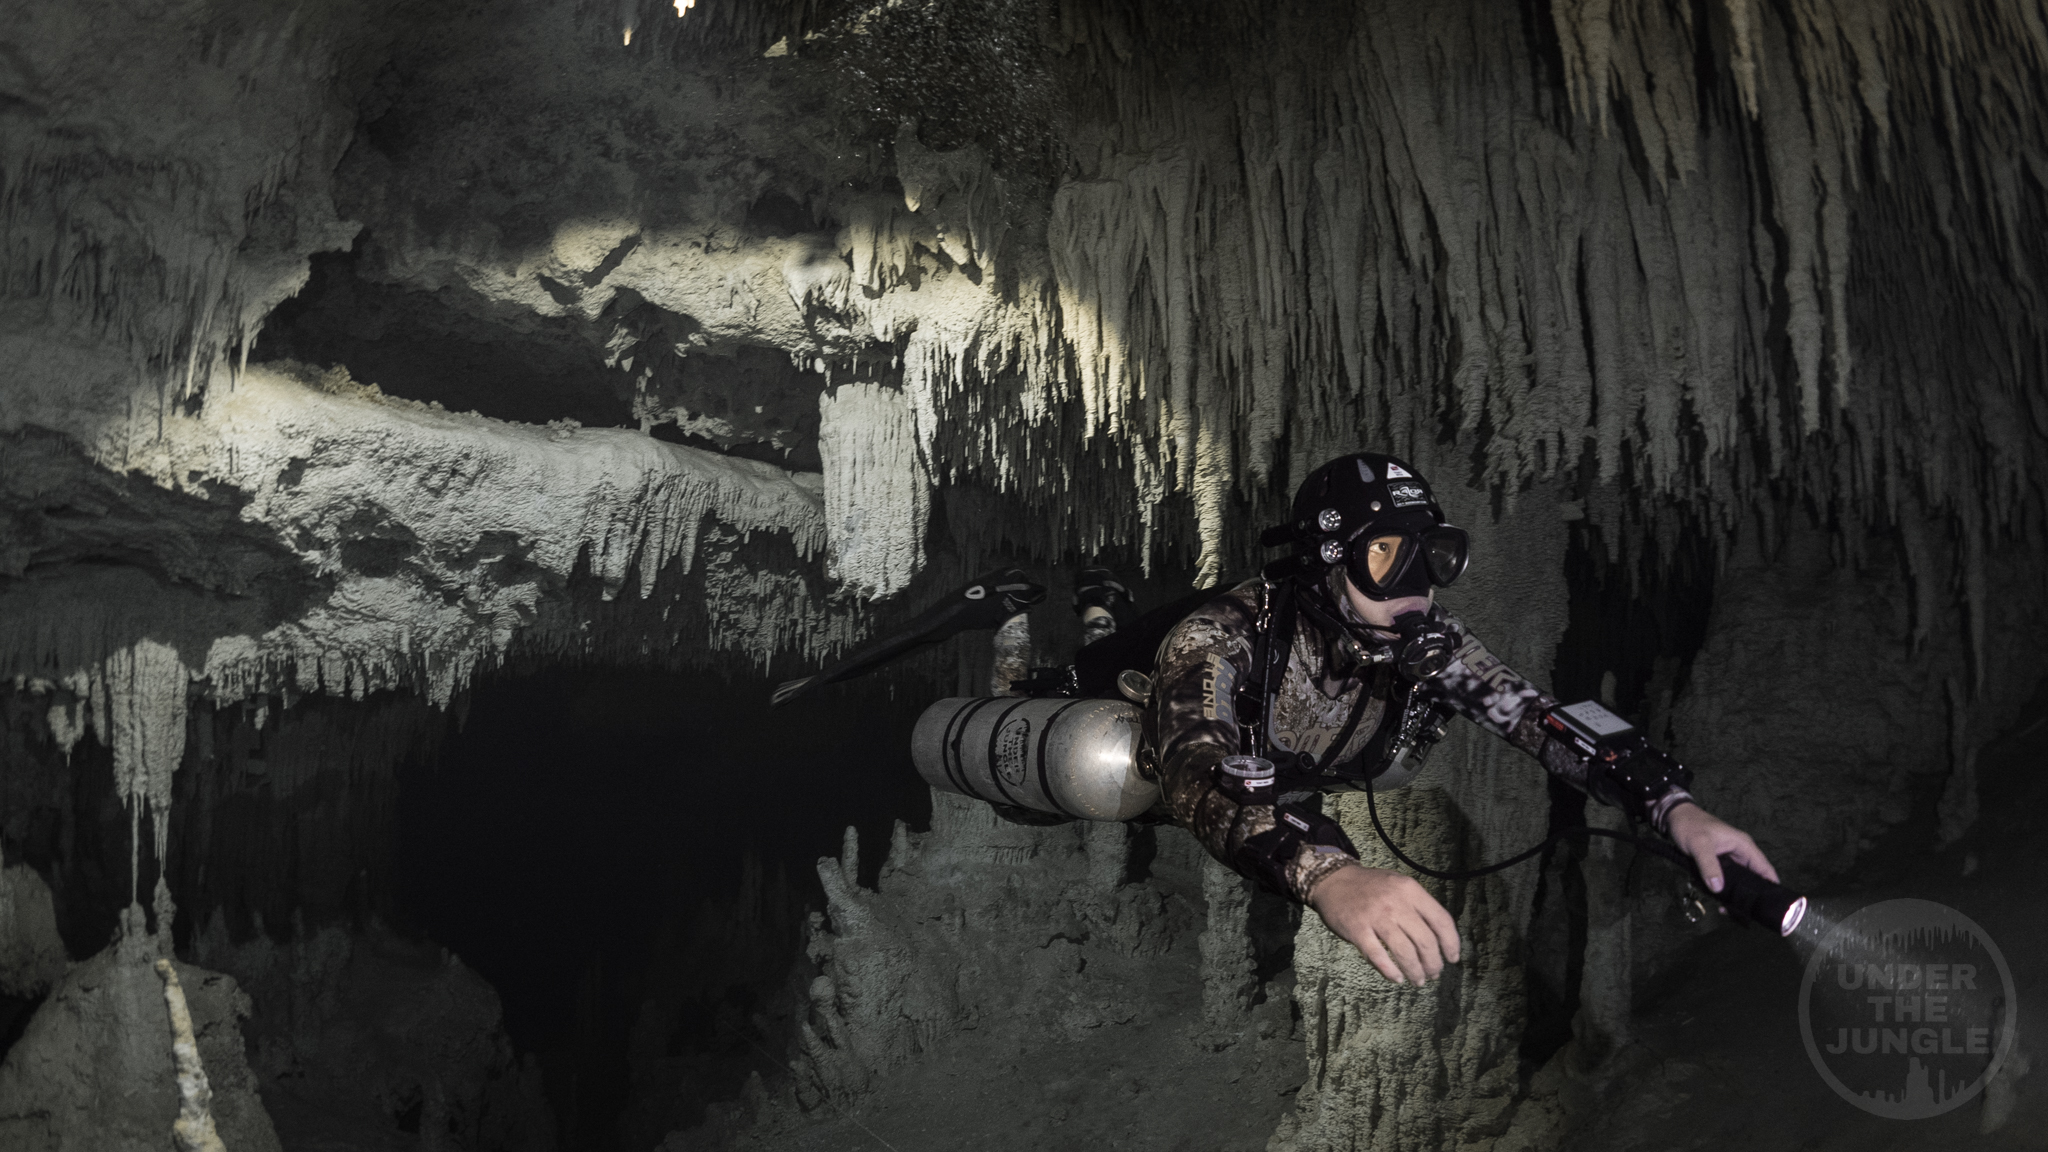 Under the Jungle, Coop One Cenote, Nai Tucha Cave, Cave Diving Mexico, Tony Won